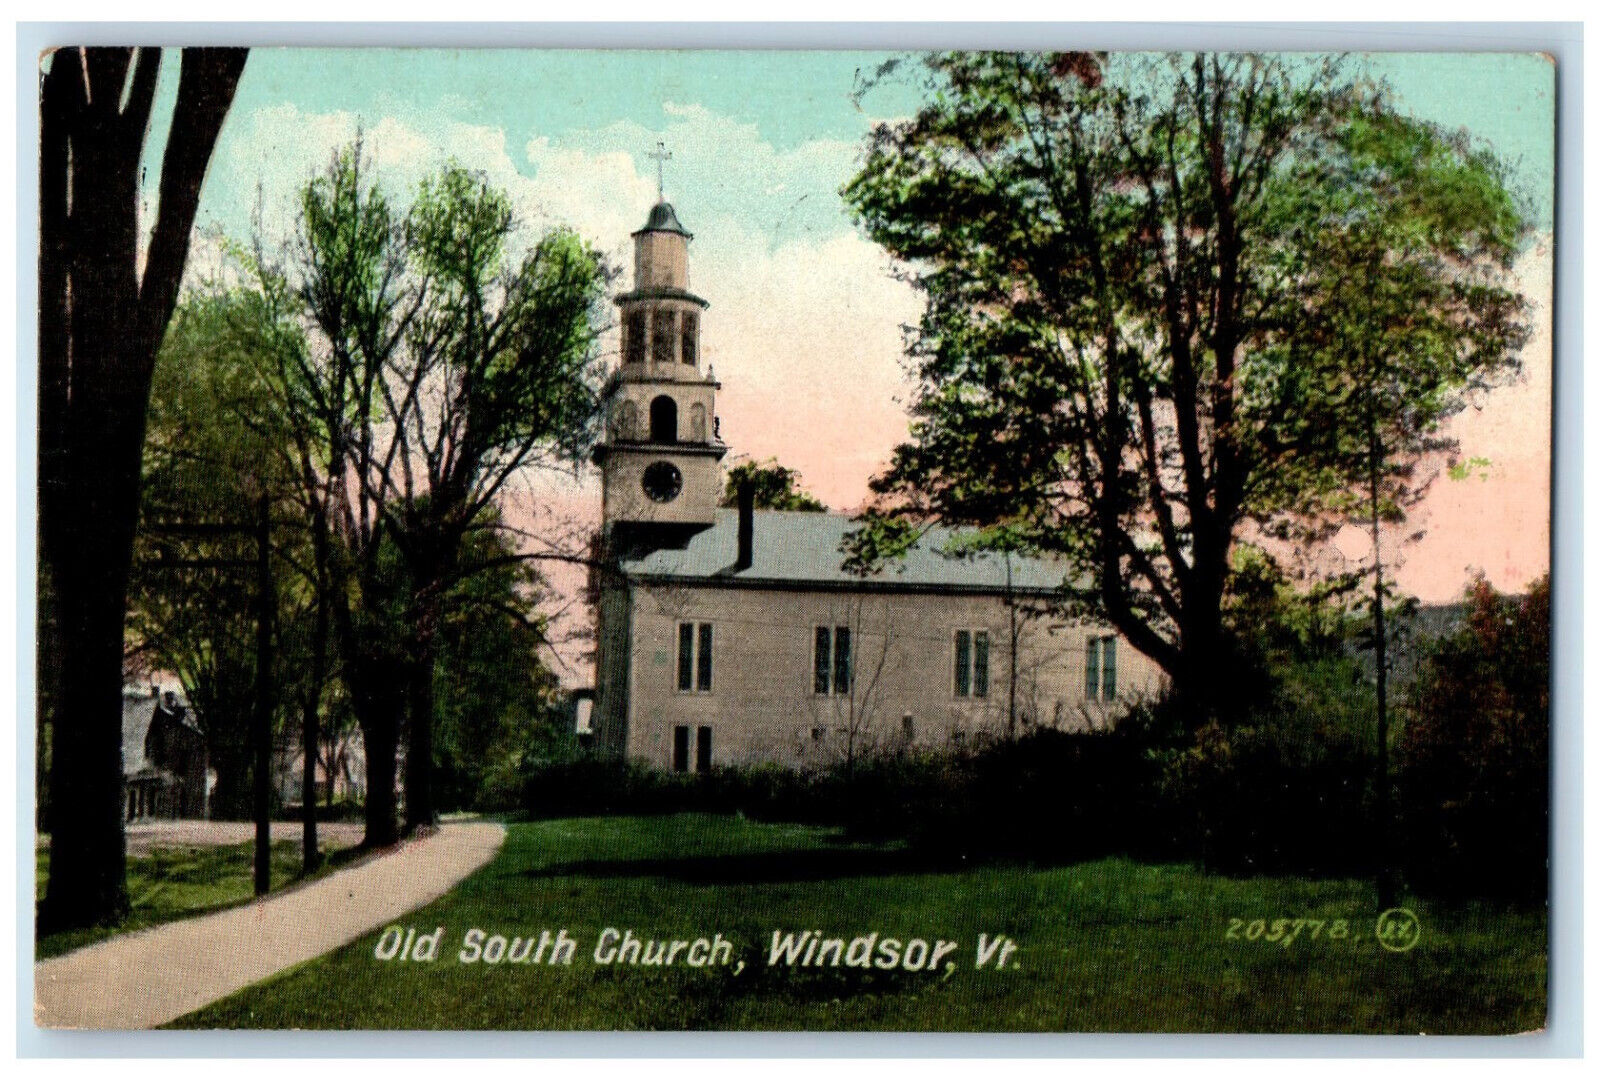 1915 Old South Church Street Trees View Windsor Vermont VT, Hanover NH Postcard